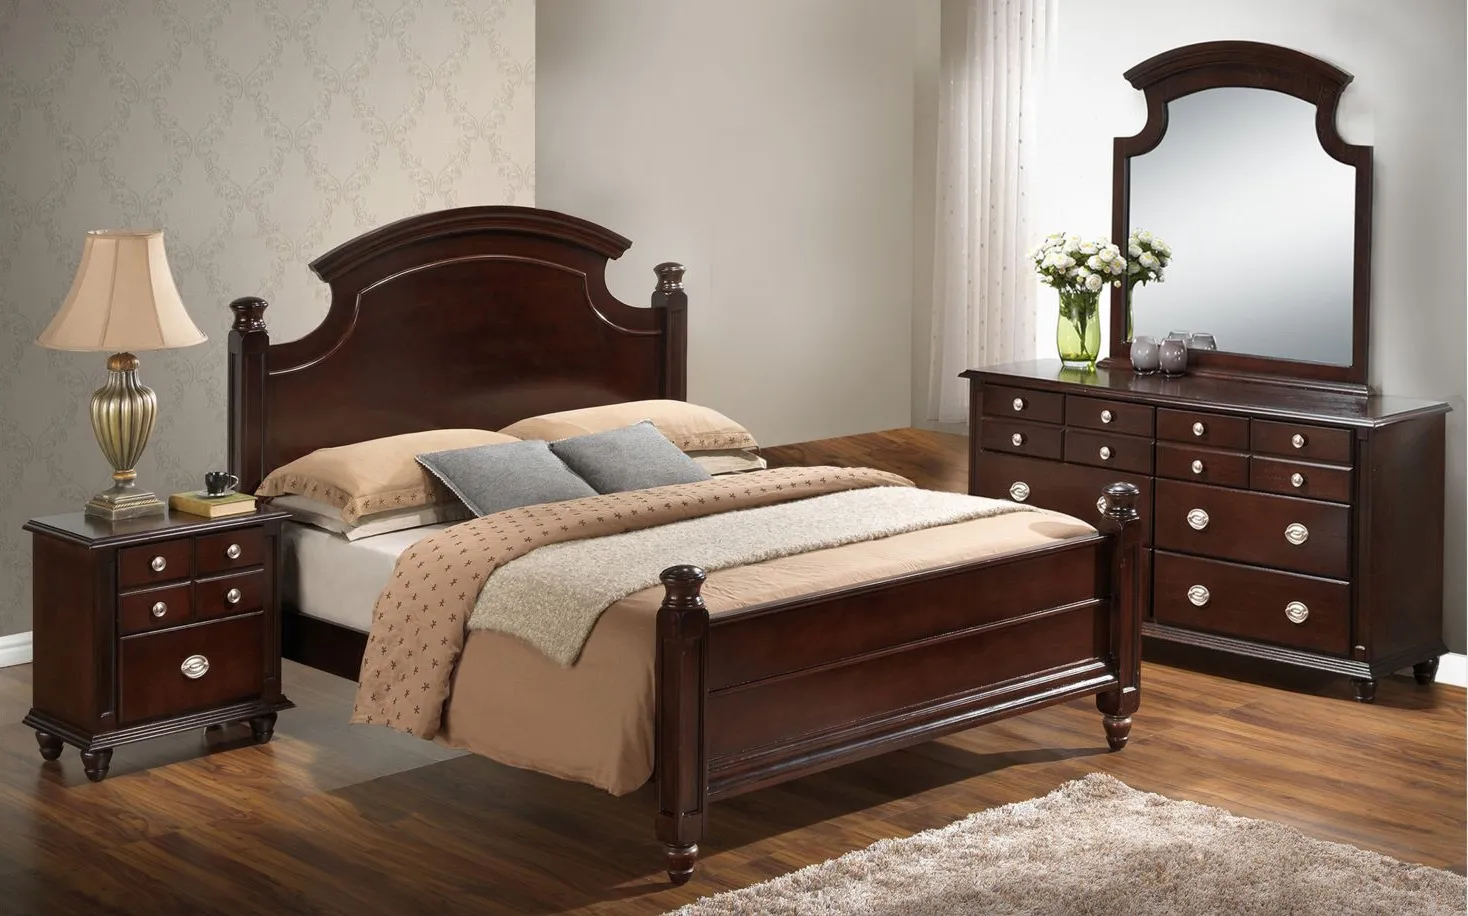 Summit 4-pc. Post Bedroom Set in Capuccino by Glory Furniture